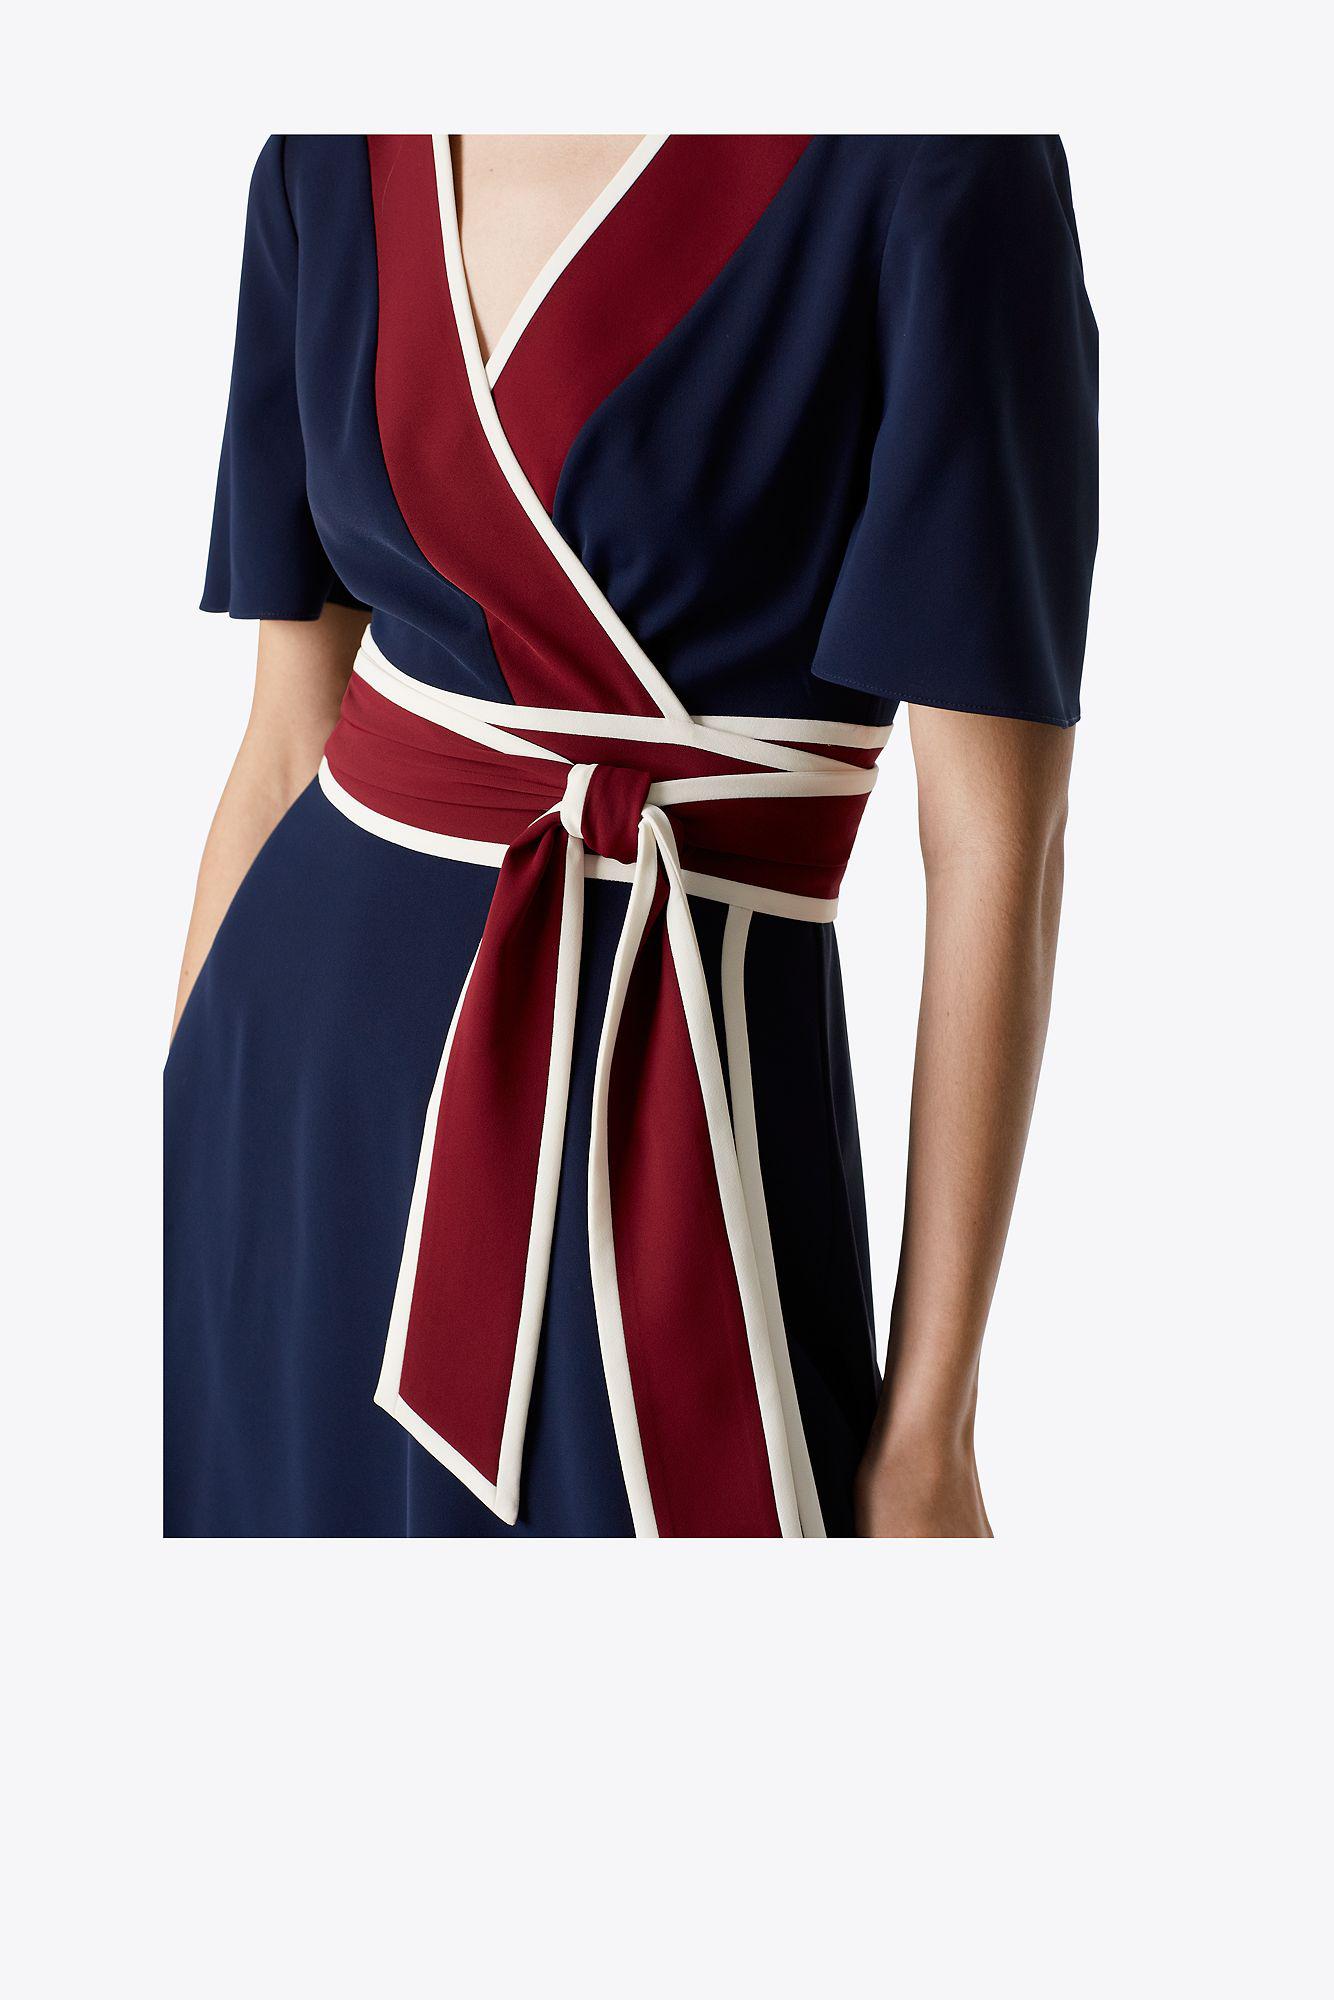 Tory Burch Synthetic Peggy Wrap Dress ...